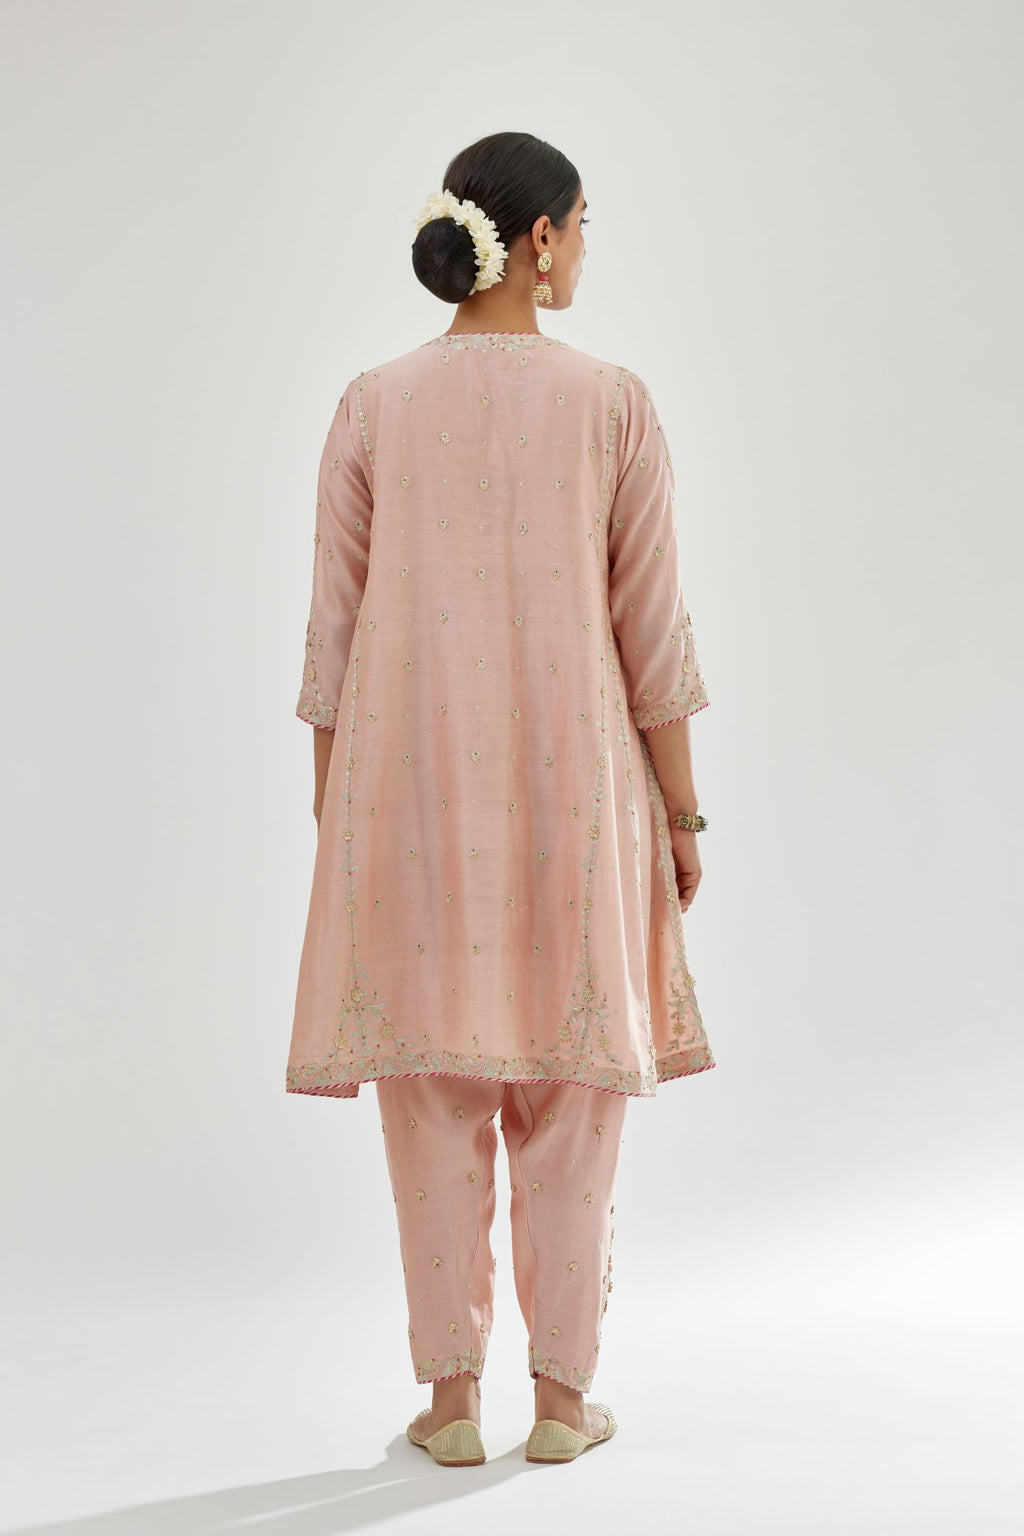 Pink silk chanderi short kalidar kurta set with all-over delicate zari bootis, detailed with dori embroidery and contrast bead work.